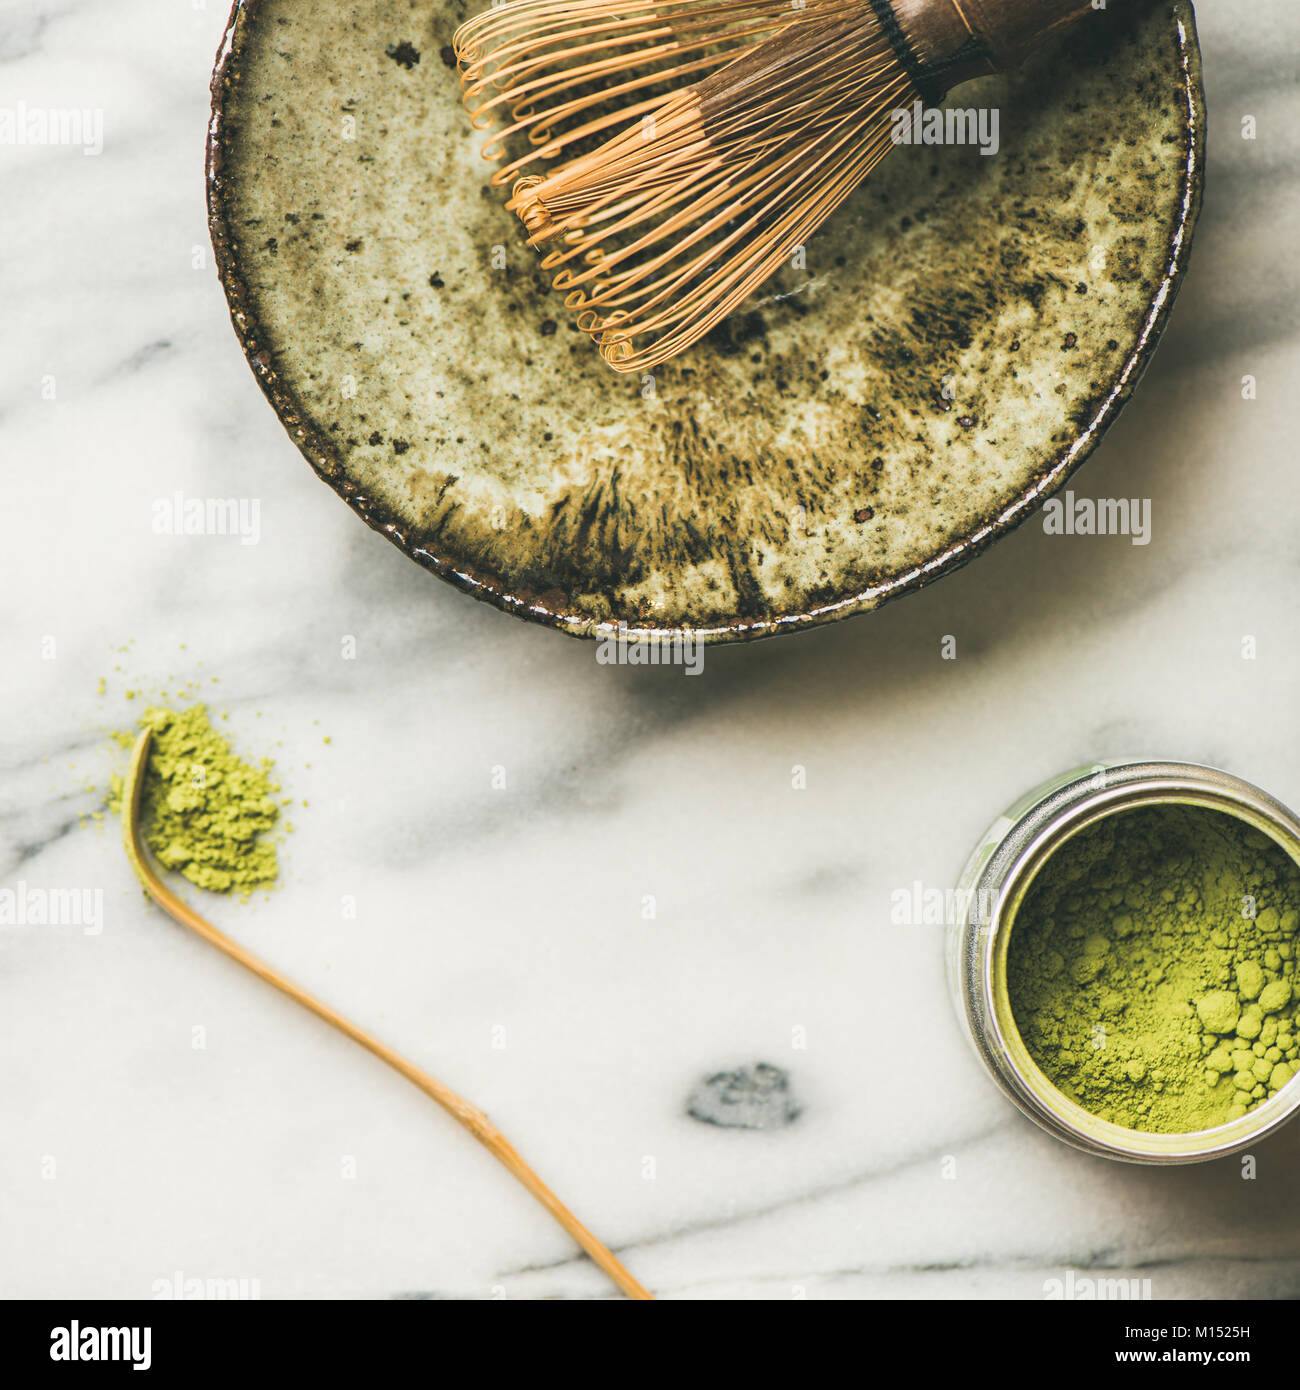 Flat-lay of Japanese tools for brewing matcha tea. Matcha powder in tin can, Chashaku spoon, Chasen bamboo whisk, Chawan bowl, cups for ceremony, grey Stock Photo